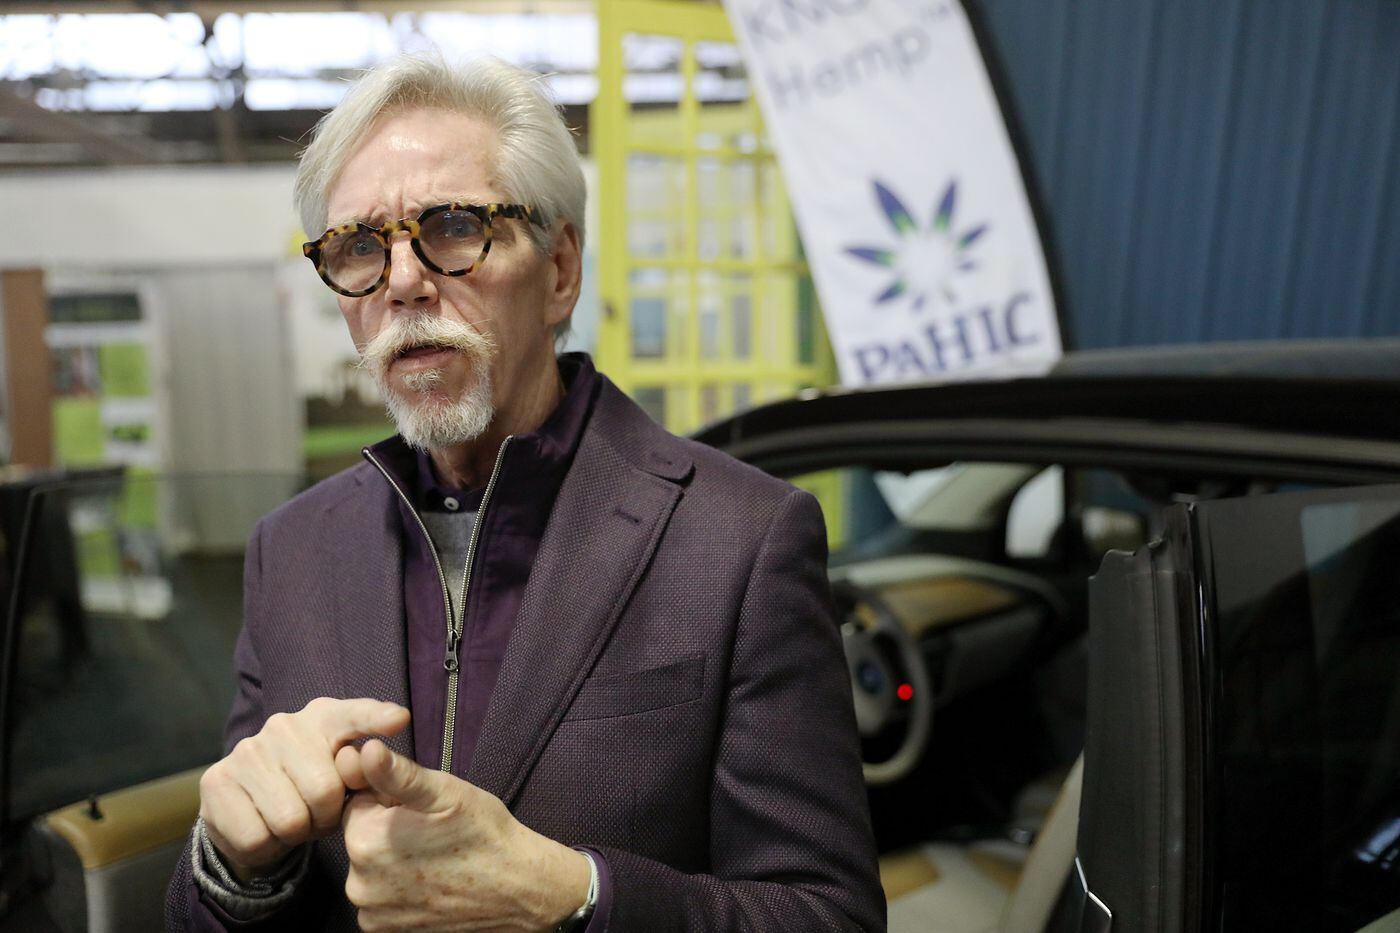 Geoff Whaling, chairman of the National Hemp Association and president of the Pennsylvania Hemp Industry Council, talks to a reporter during the annual Pennsylvania Farm Show at the Pennsylvania Farm Show Complex & Expo Center in Harrisburg, Pa., on Tuesday, Jan. 7, 2020.